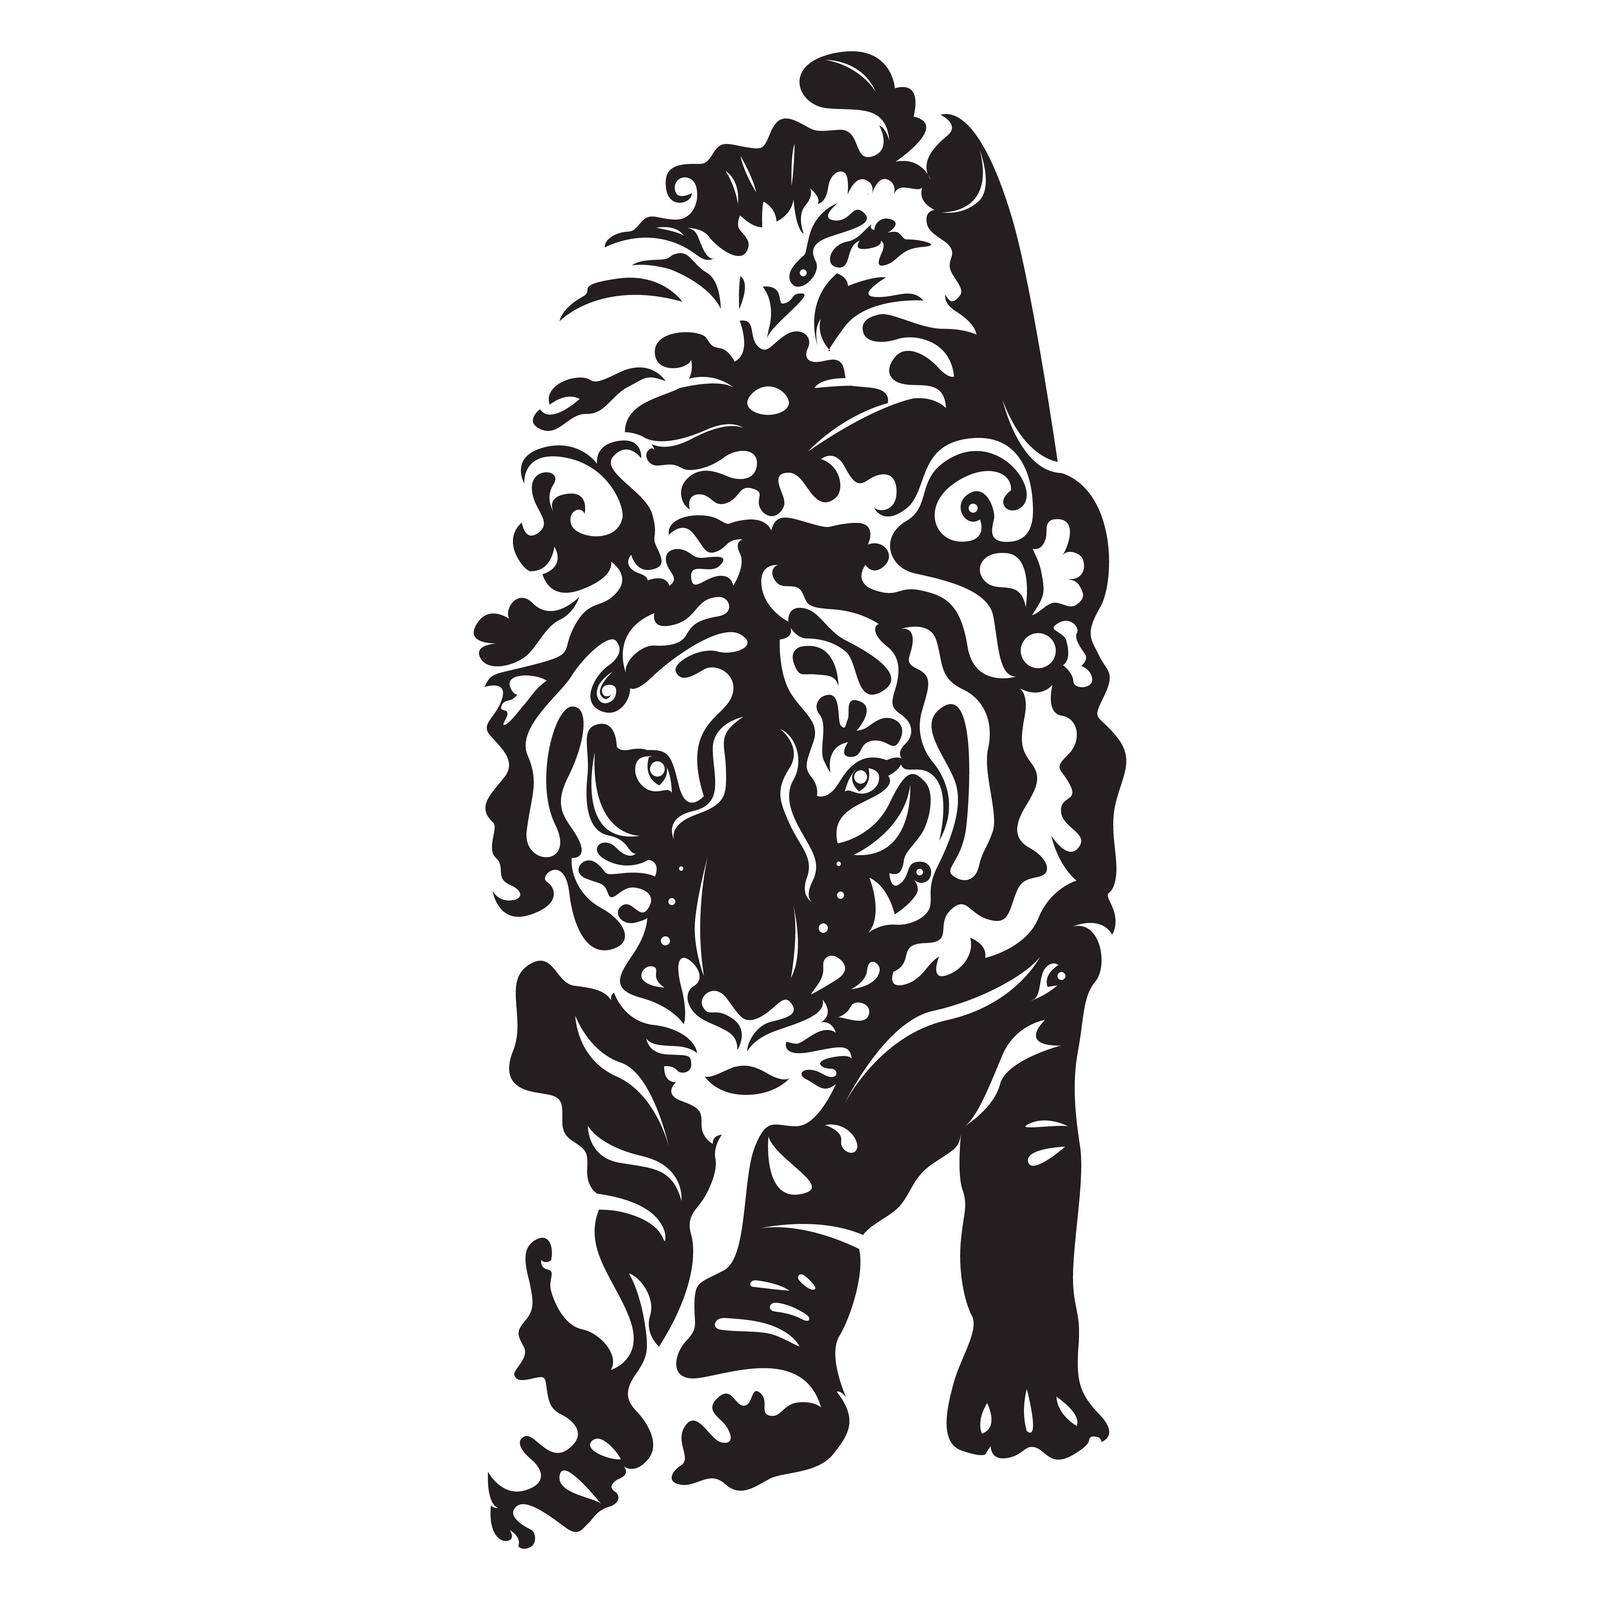 TIGER in black and white style siihouette white white background, vector illustration.